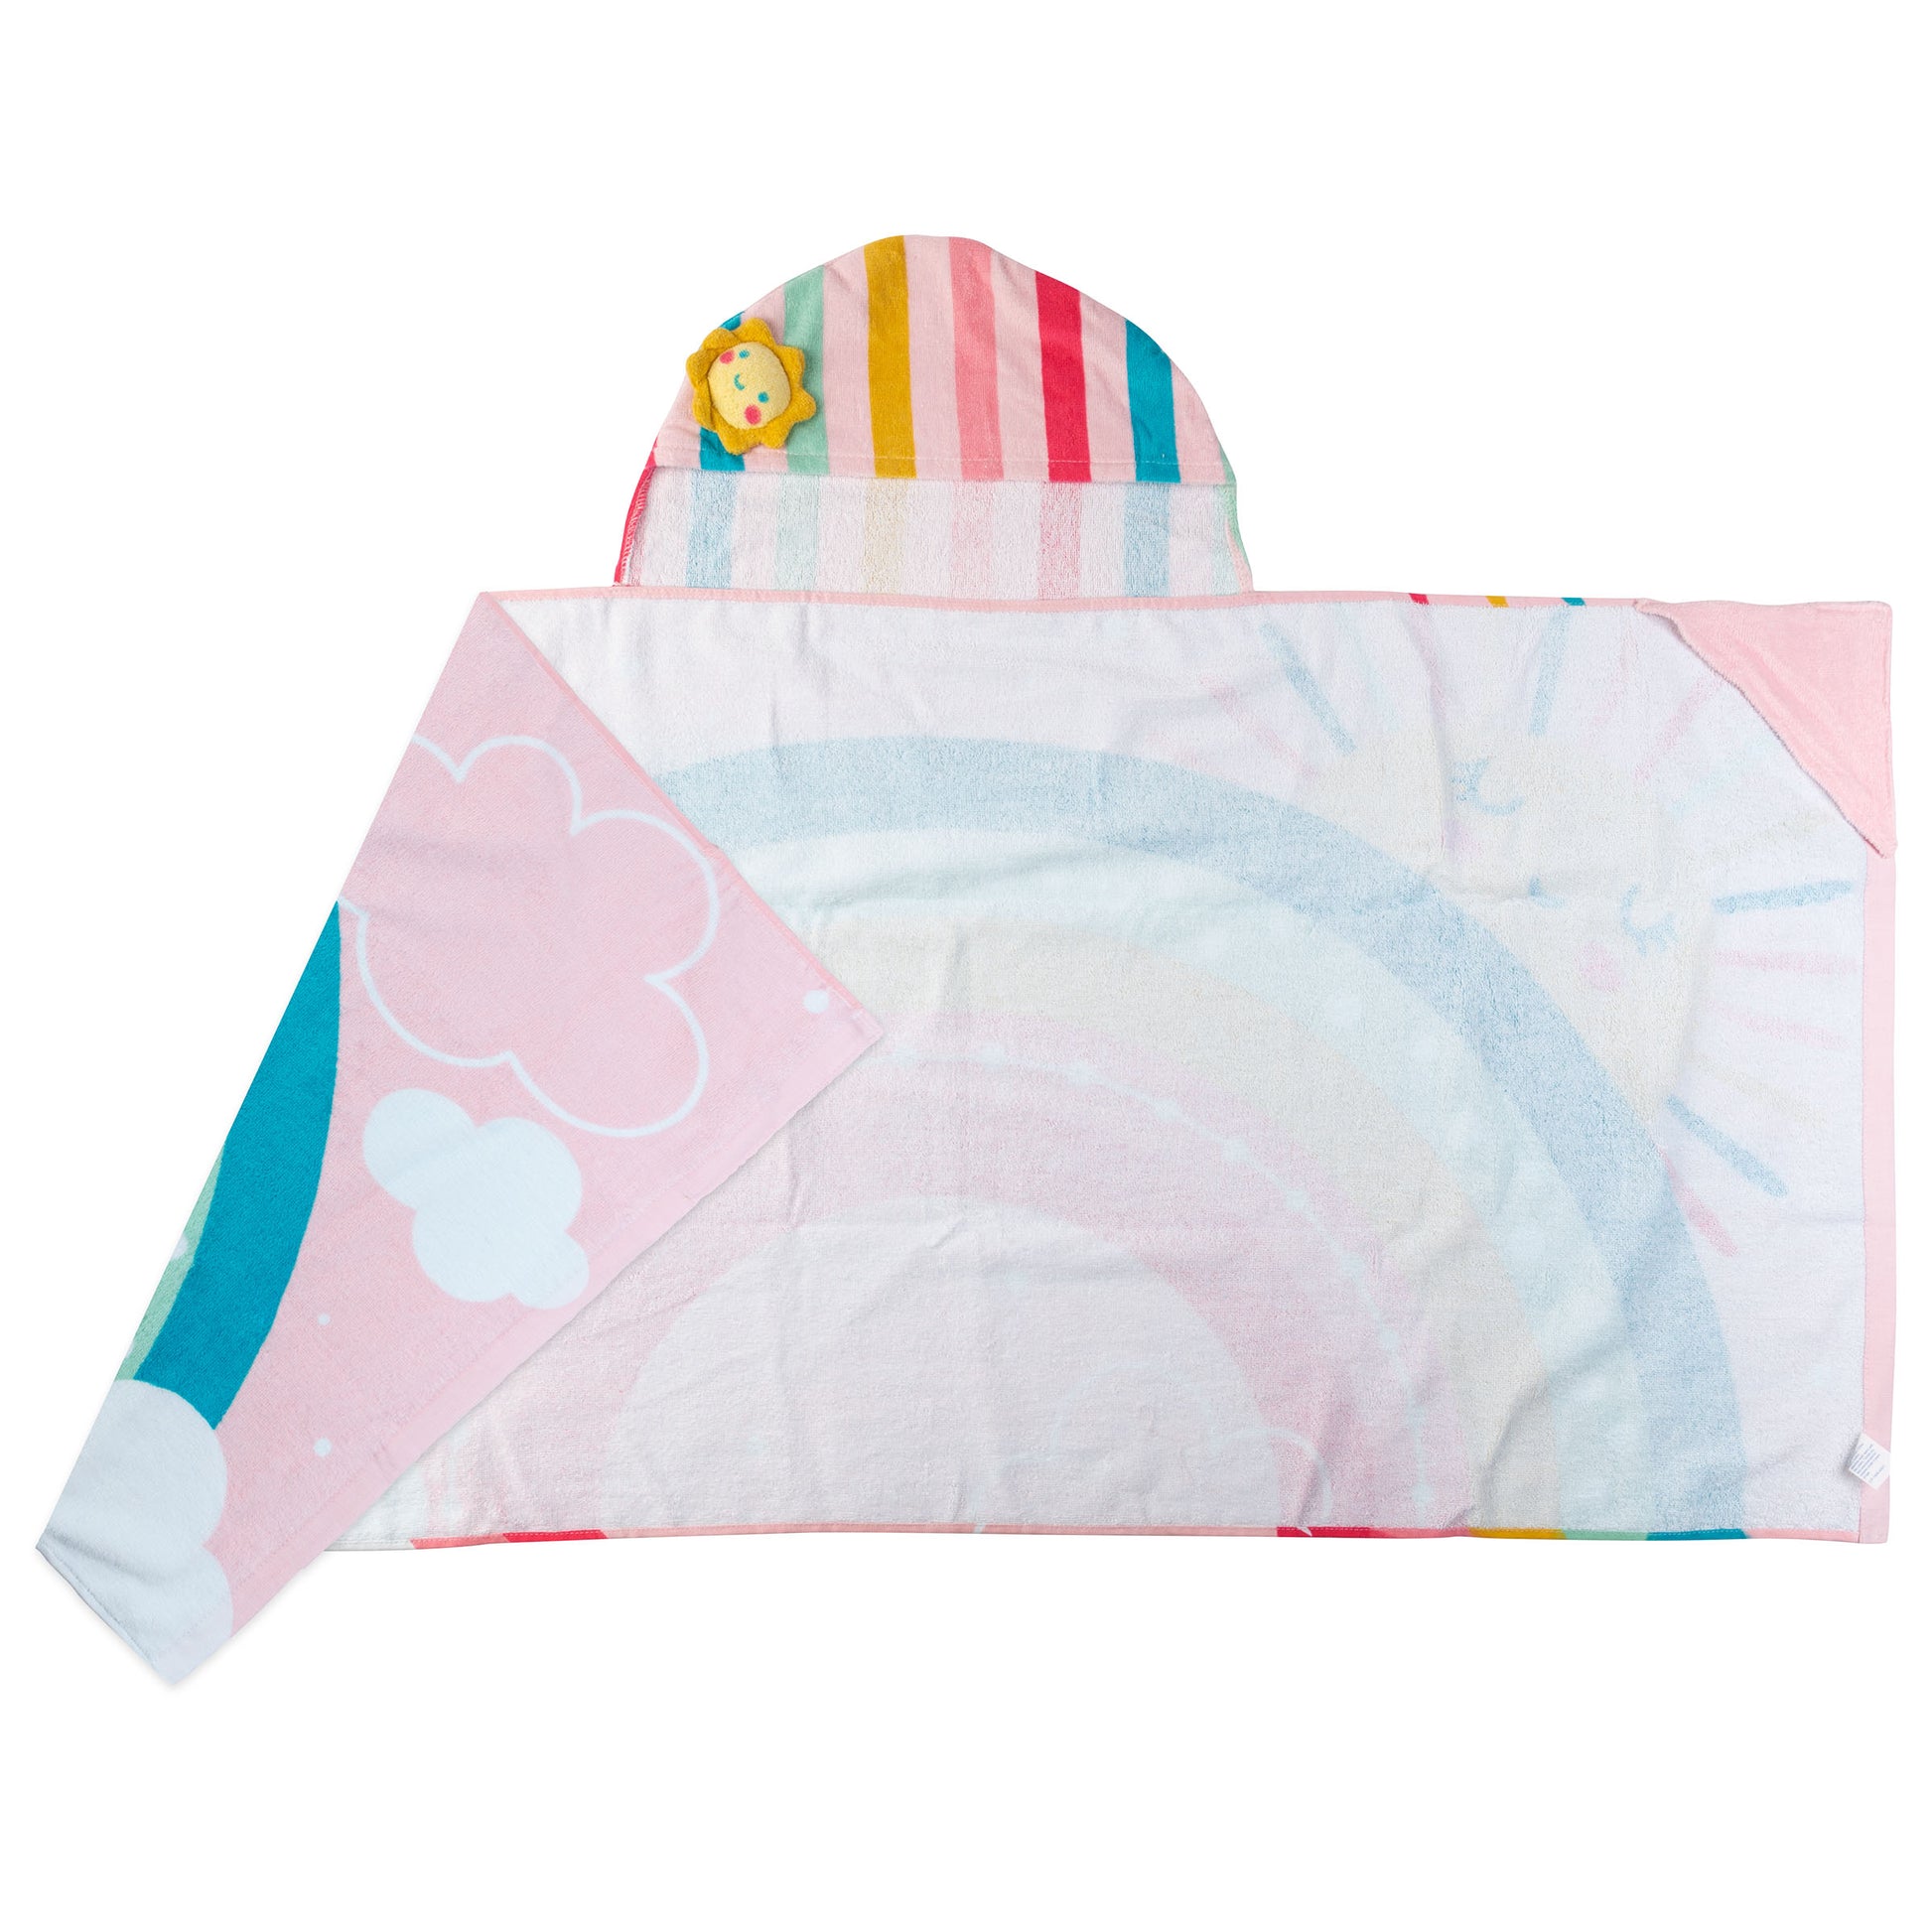 Rainbow Hooded Towel with Personalization